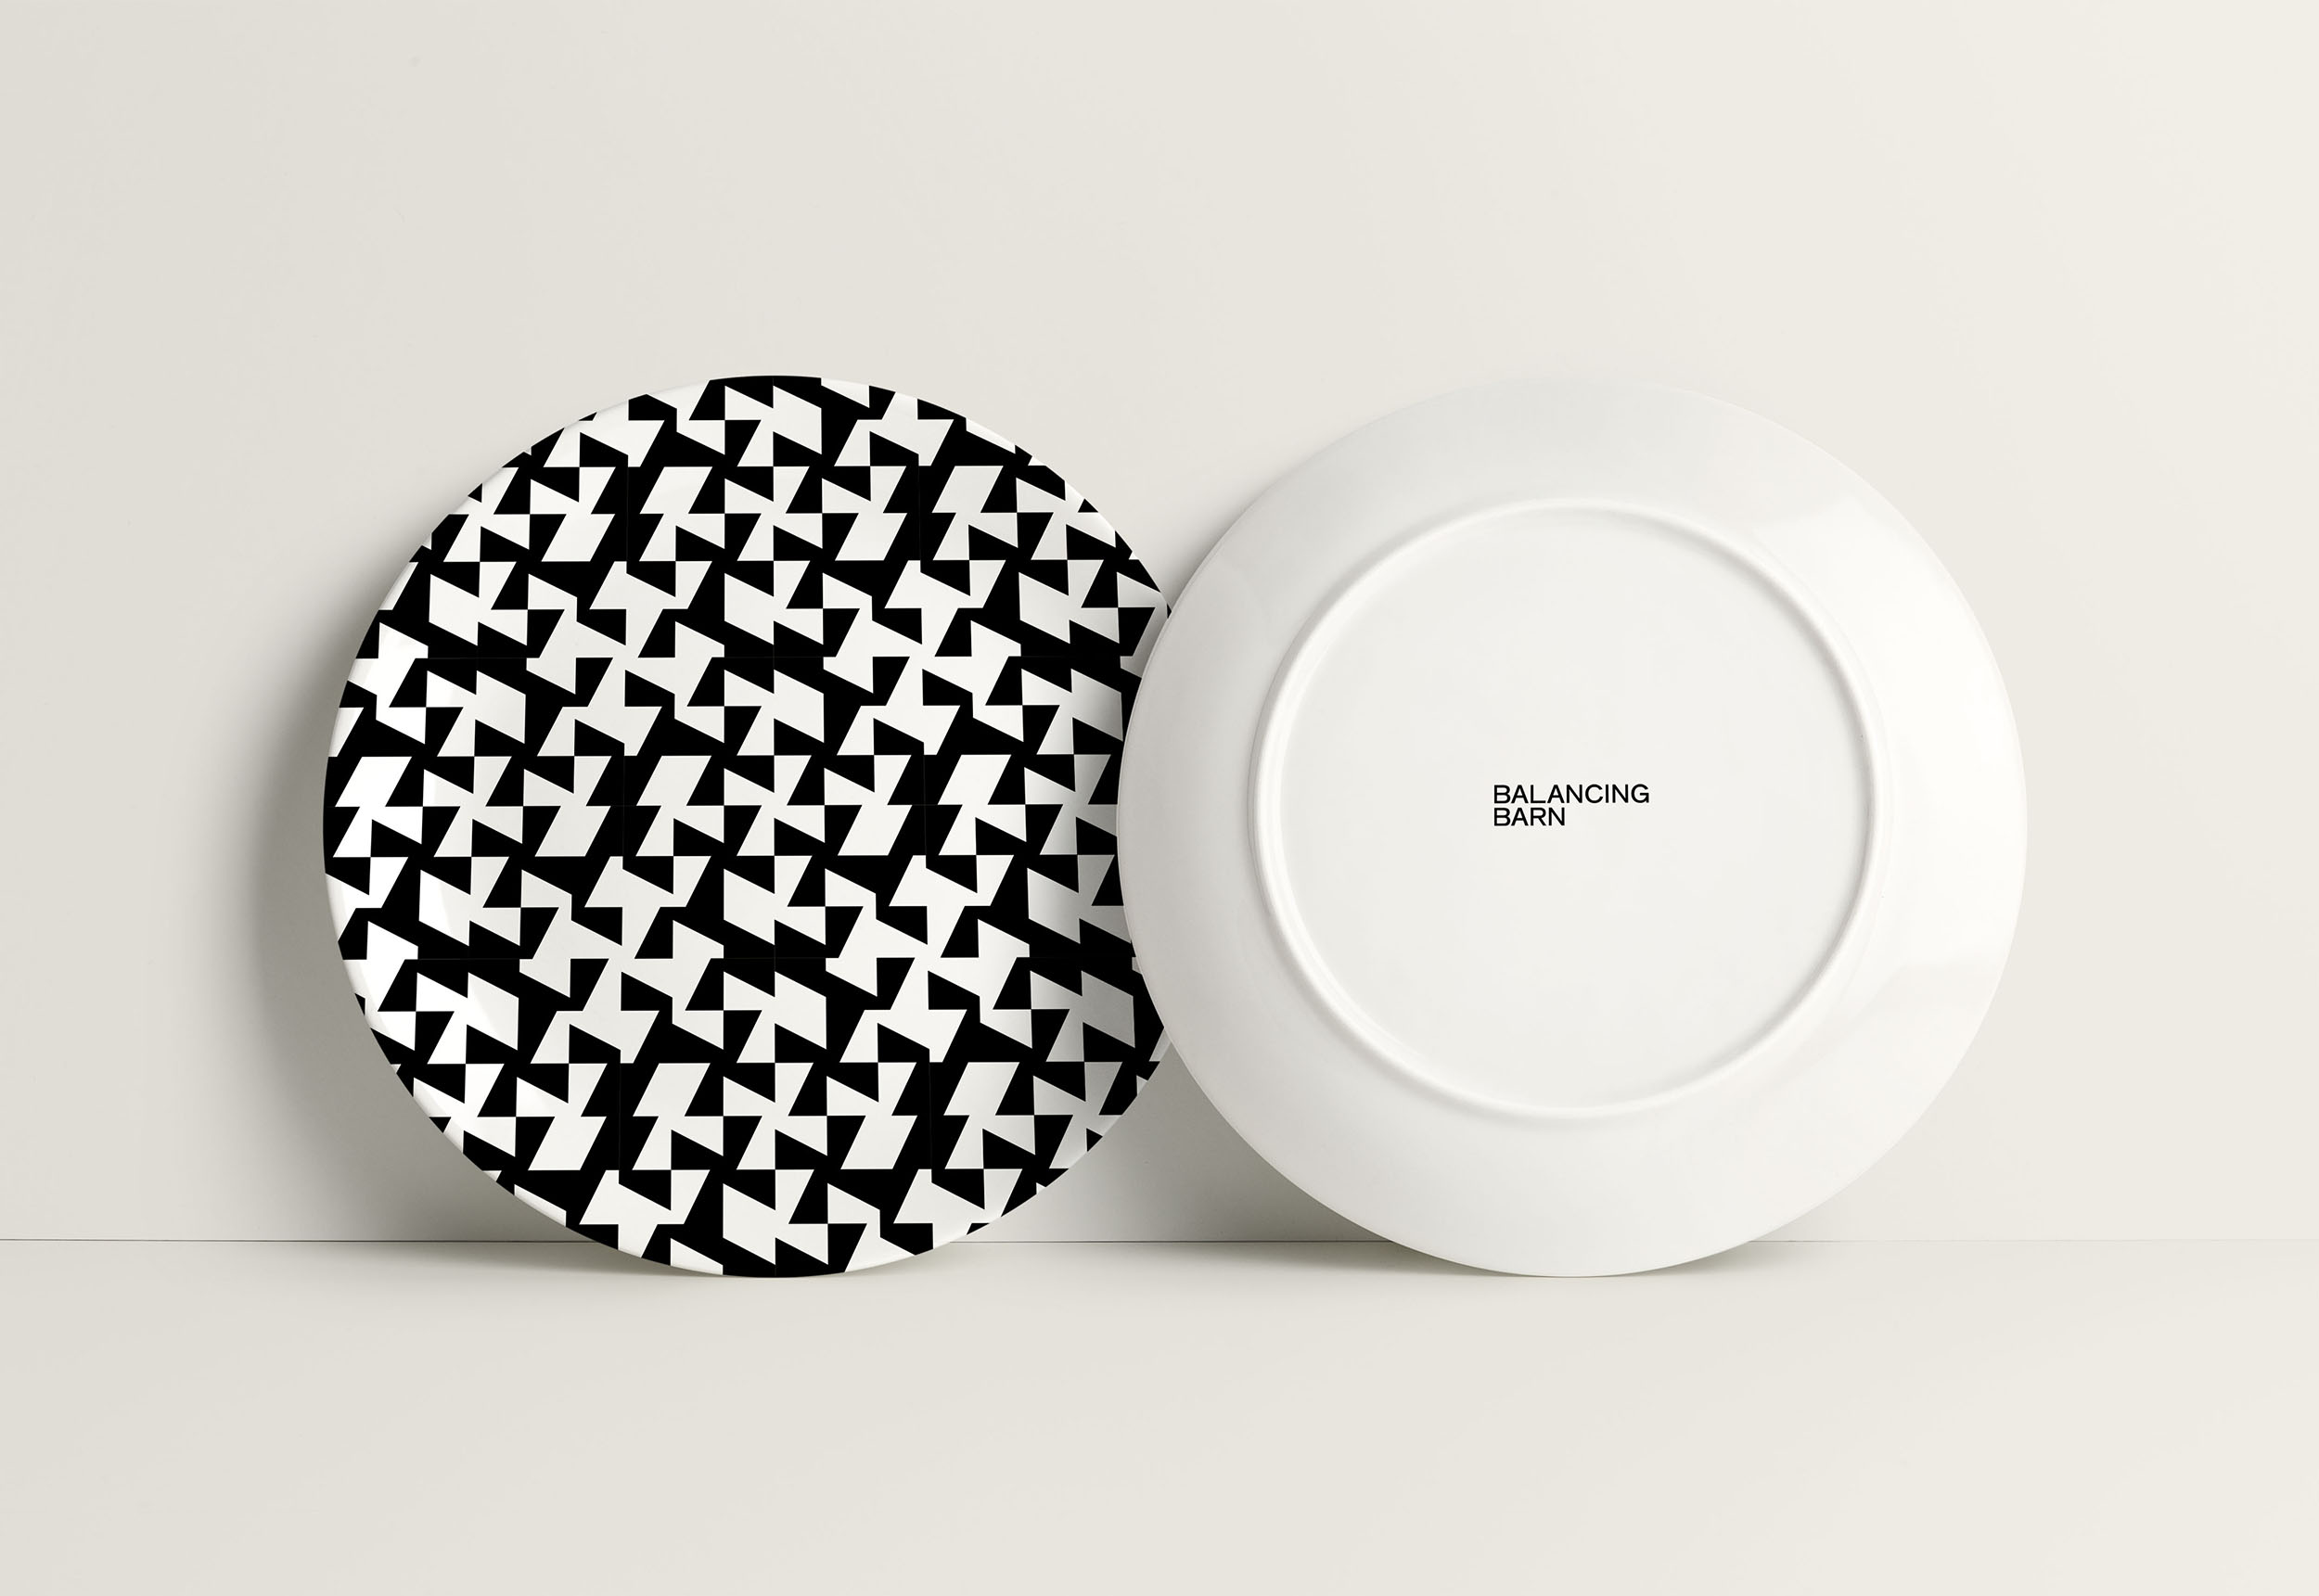 Graphic Communication work by James Keeley showing Balancing Barn Plates front and back. The front of the plate has a black and white geometric pattern, on the back of the plate is the Balancing Barn logo.